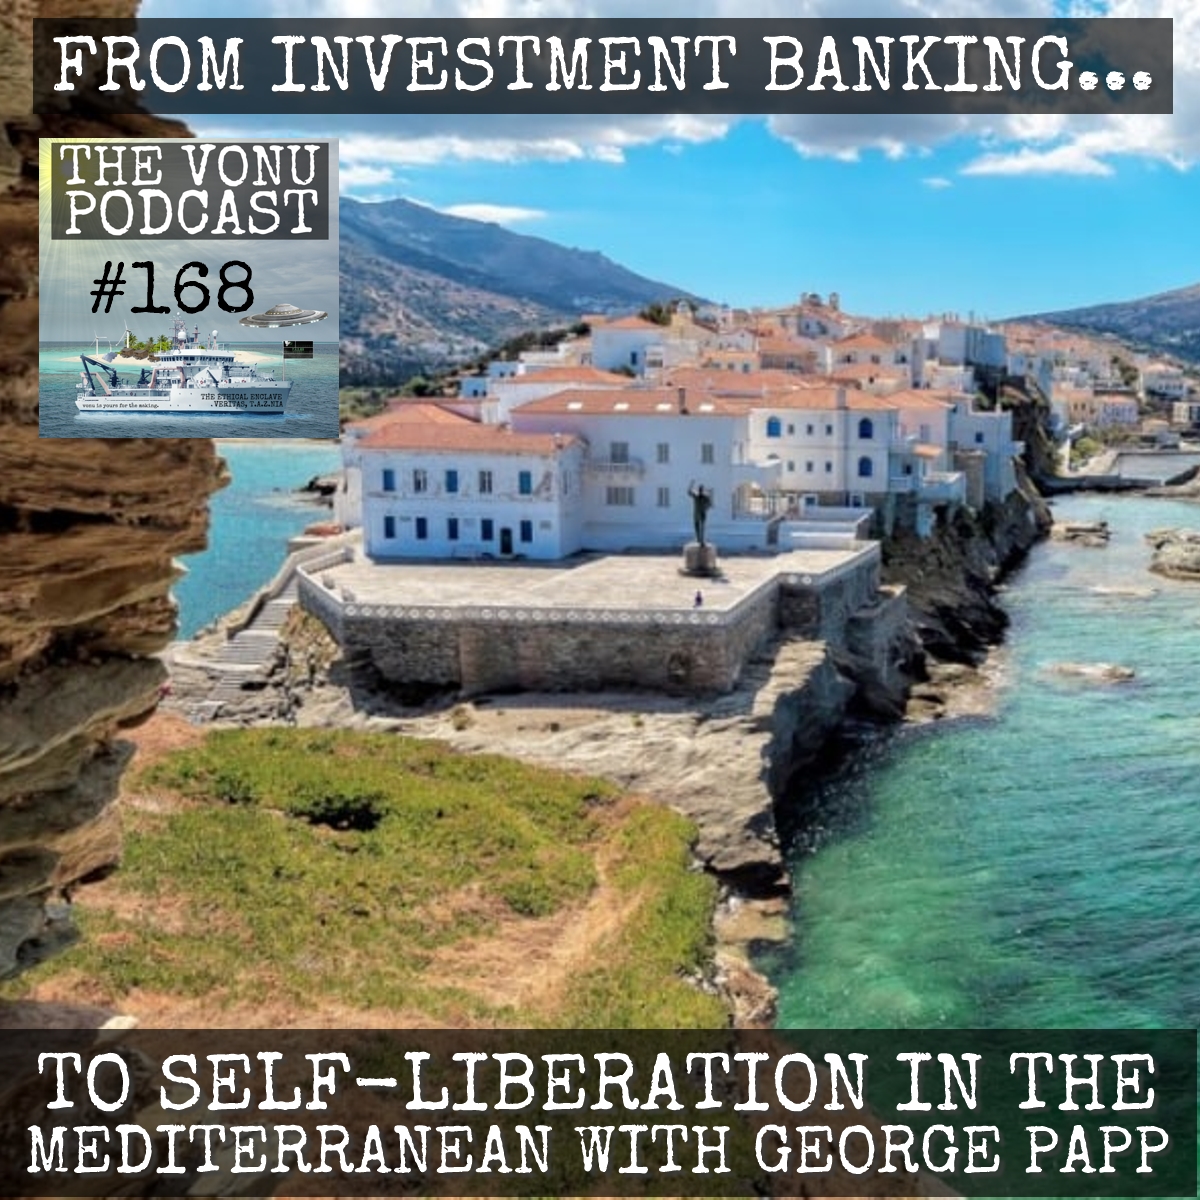 TVP #168: From Investment Banking, To Self-Liberation in the Mediterranean with George Papp (The Conscious Renegade)